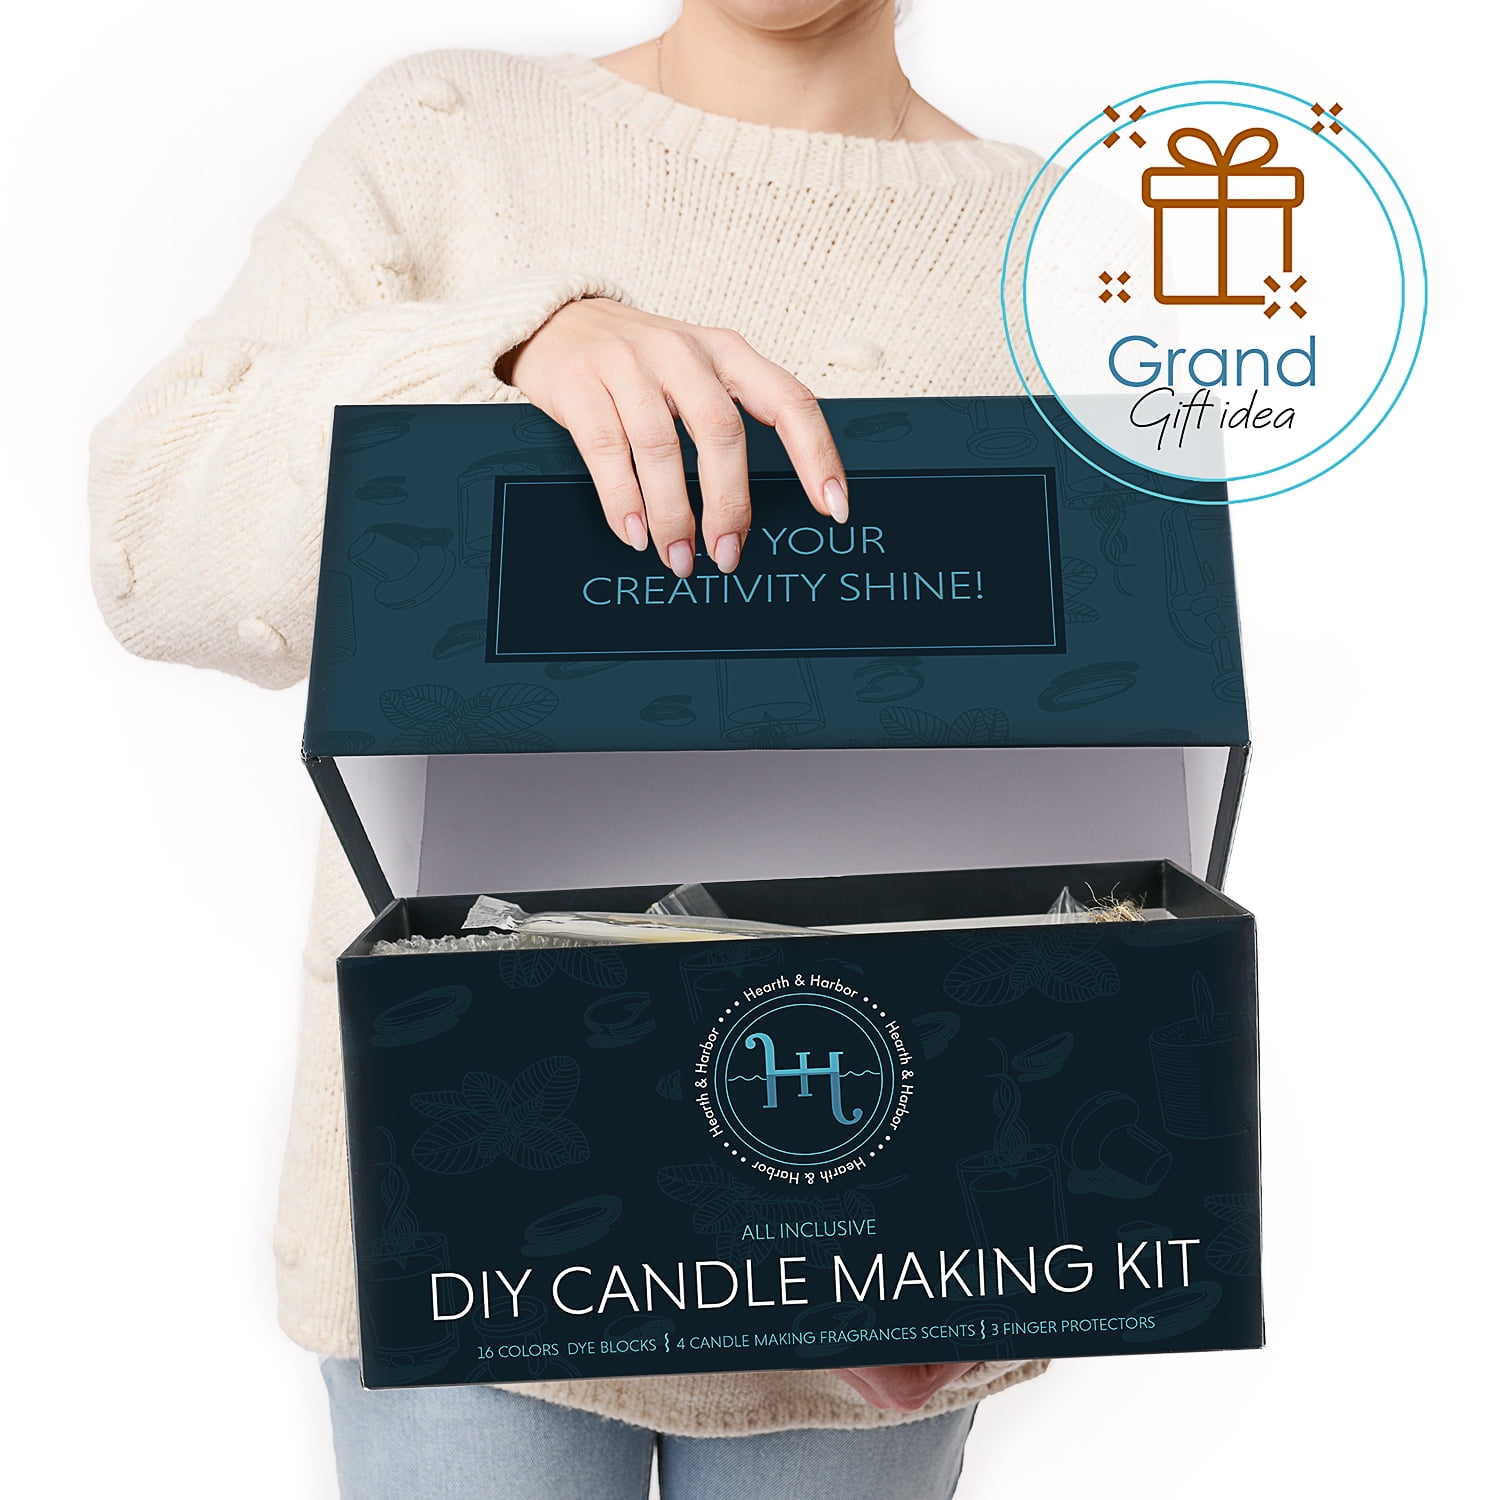 The Perfect Melting Point: Secrets to Soy Wax Candle Making – New Hobby Box